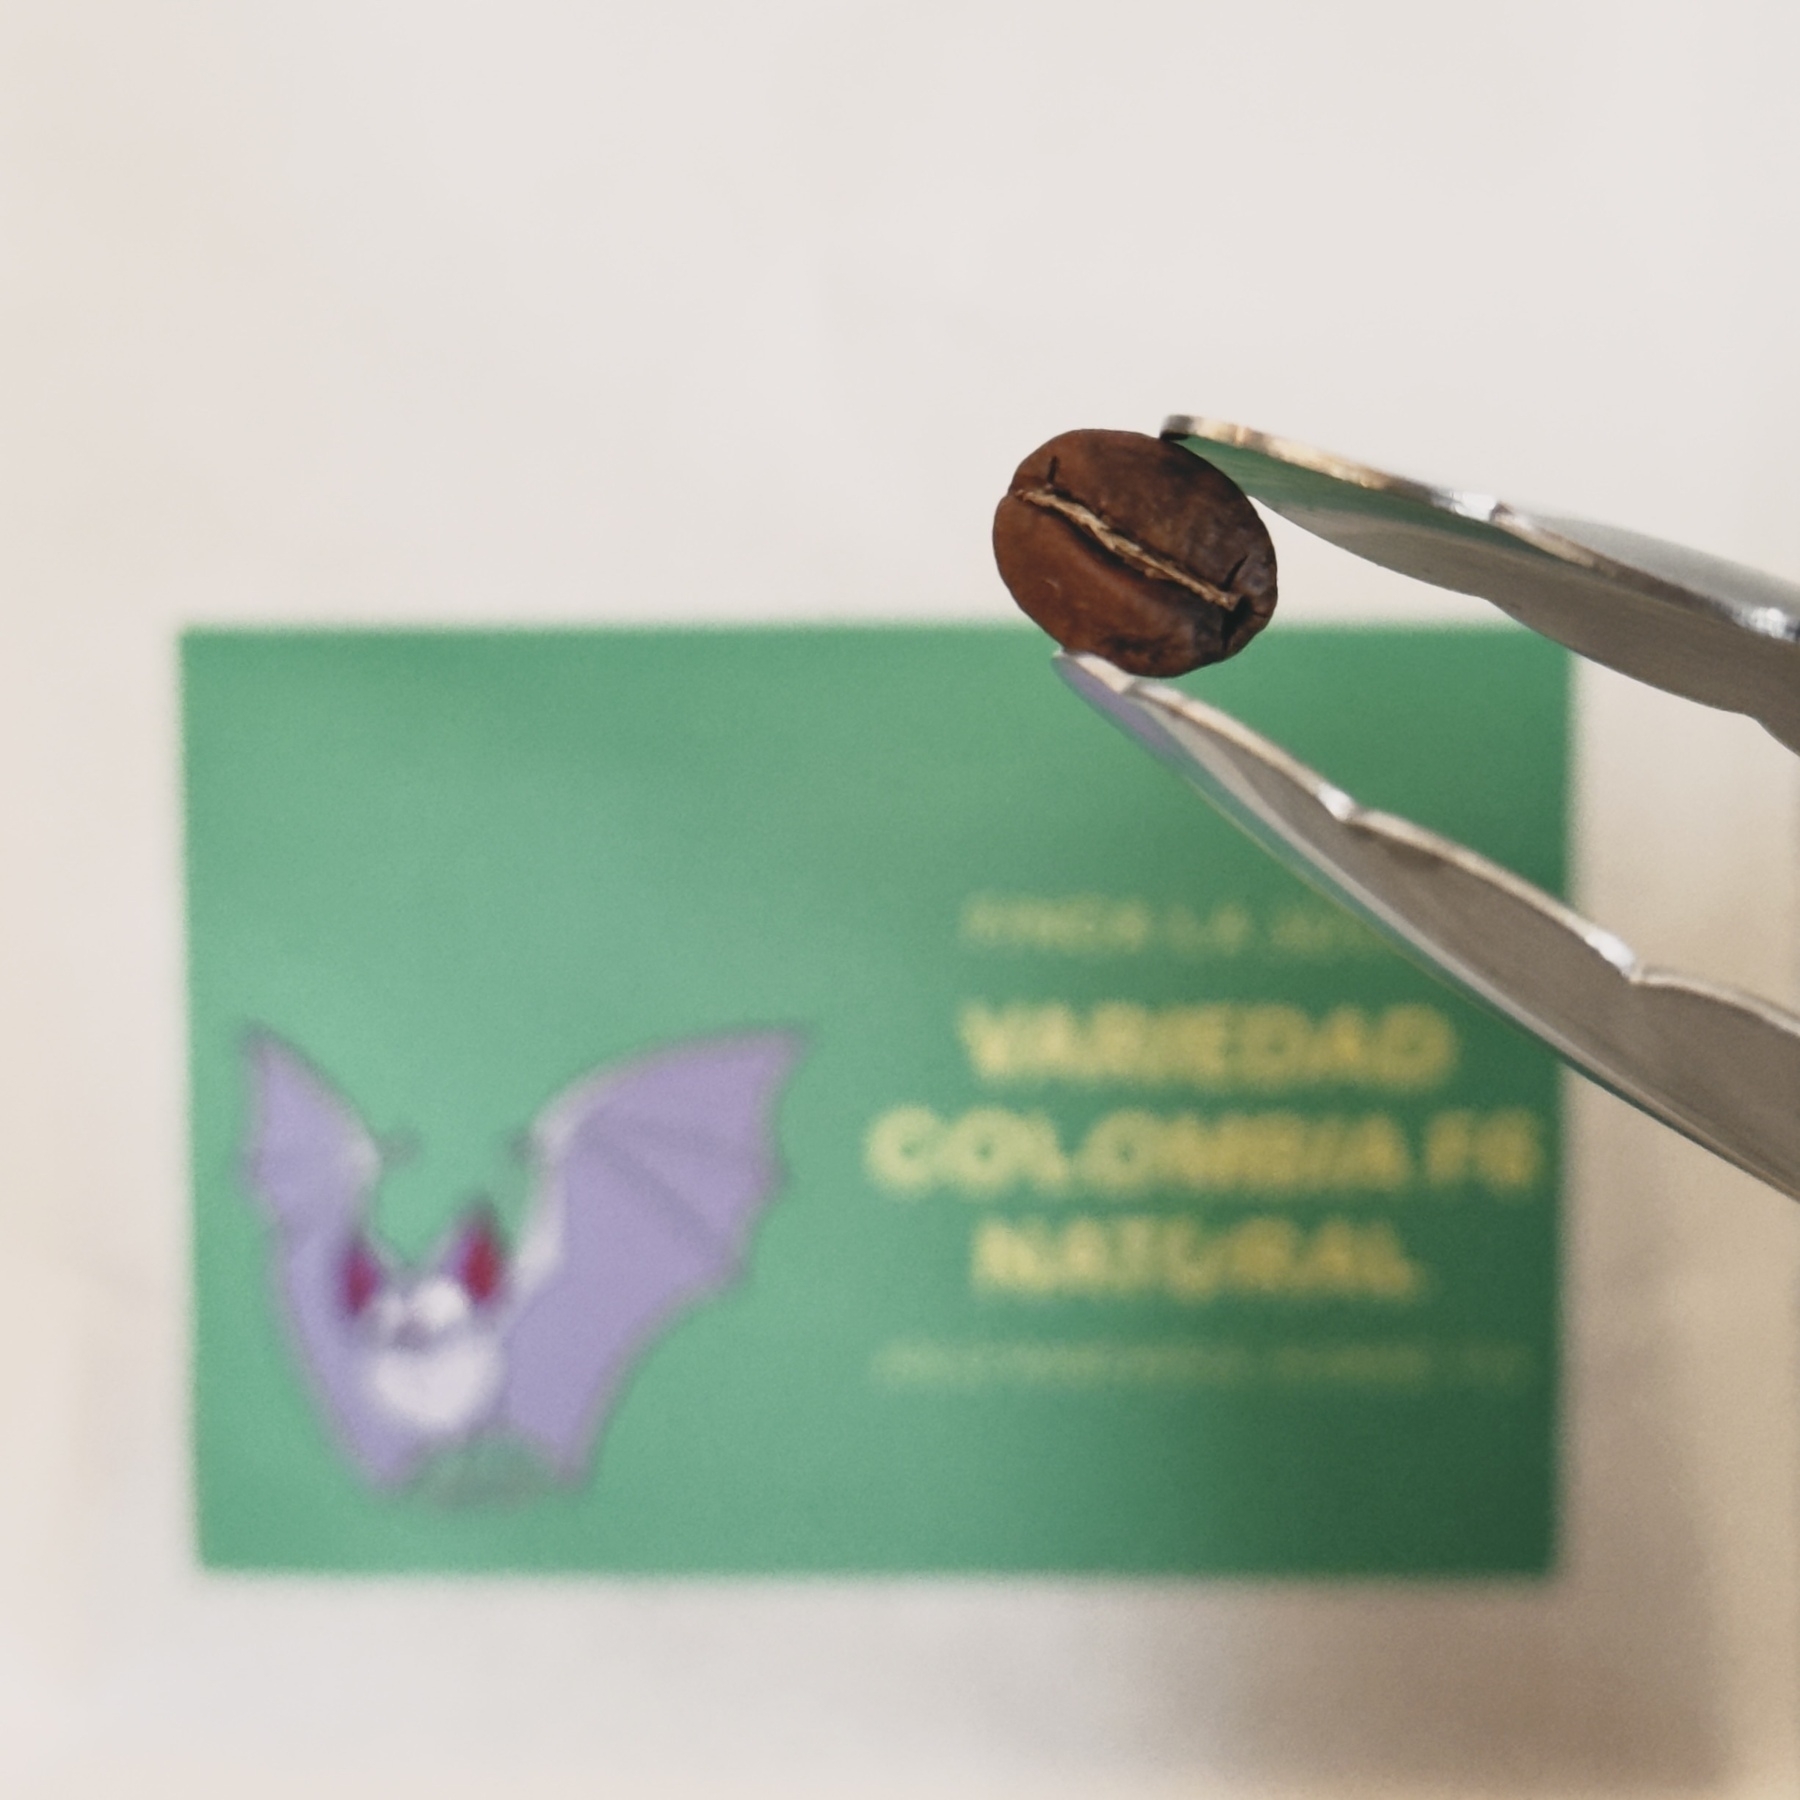 Coffee bean held by tongs above a blurred out coffee bag labeled Variedad Colombia F6 Natural